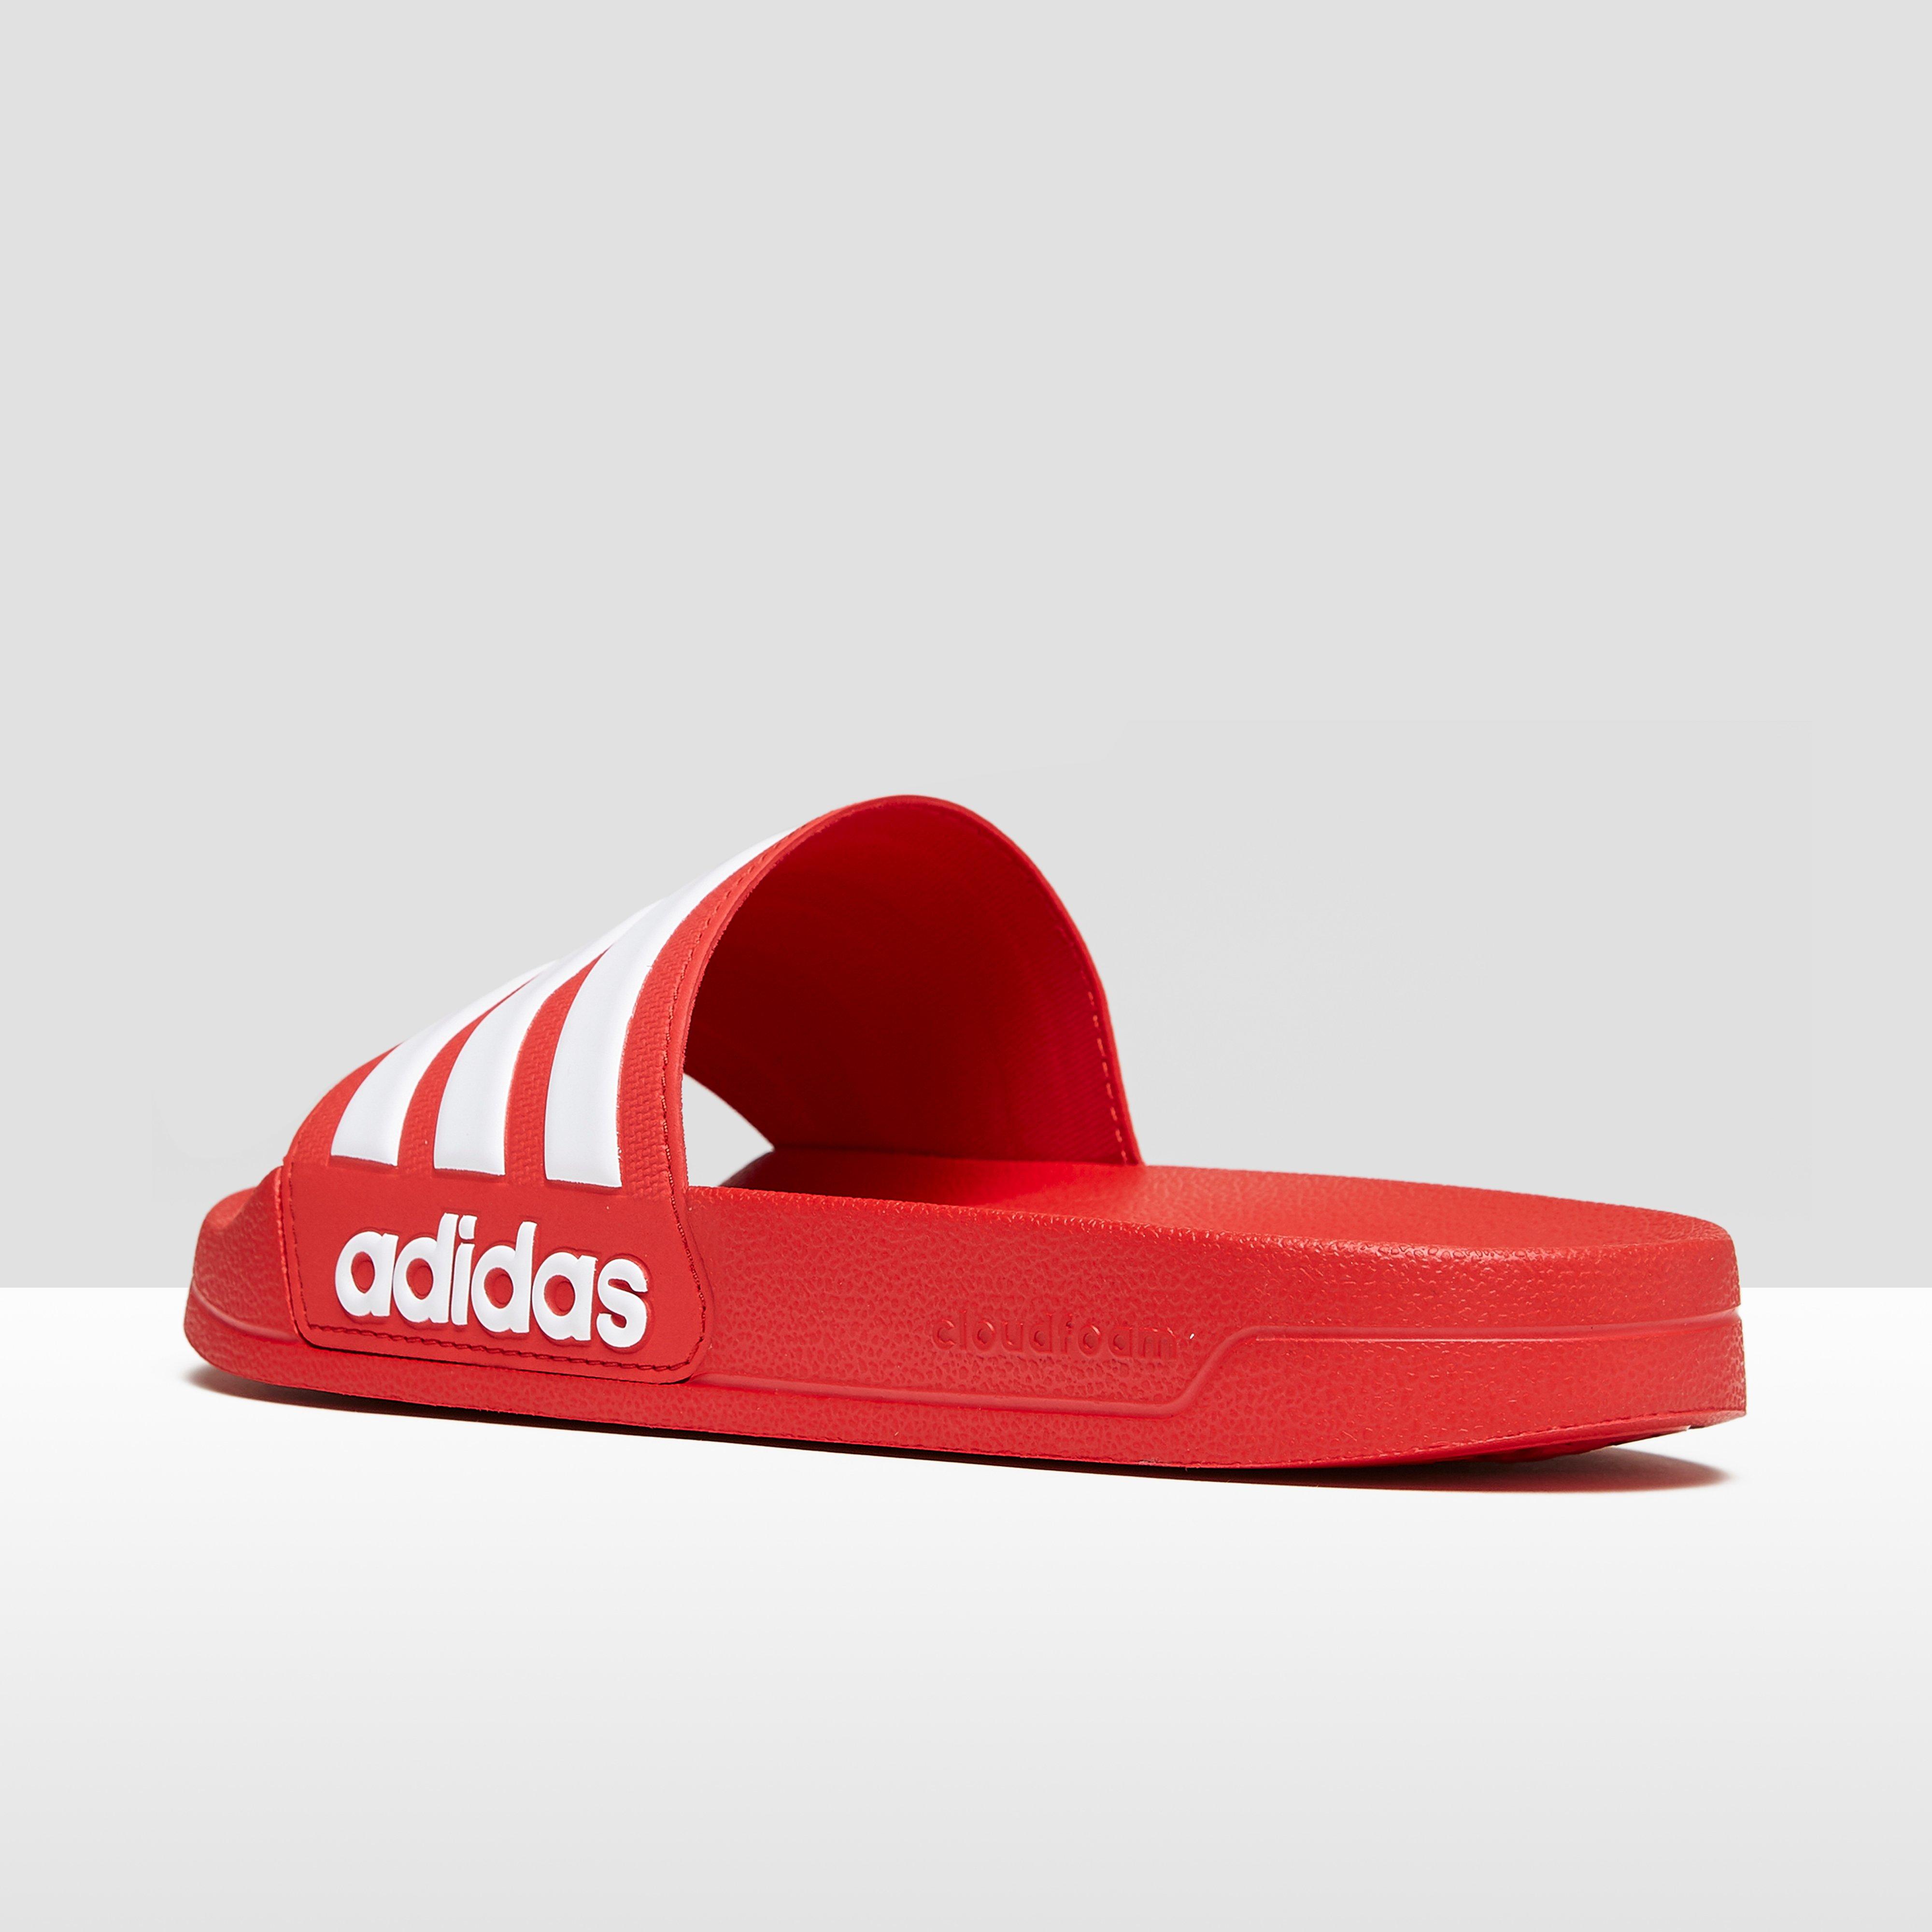 ADIDAS SLIPPERS ROOD HEREN